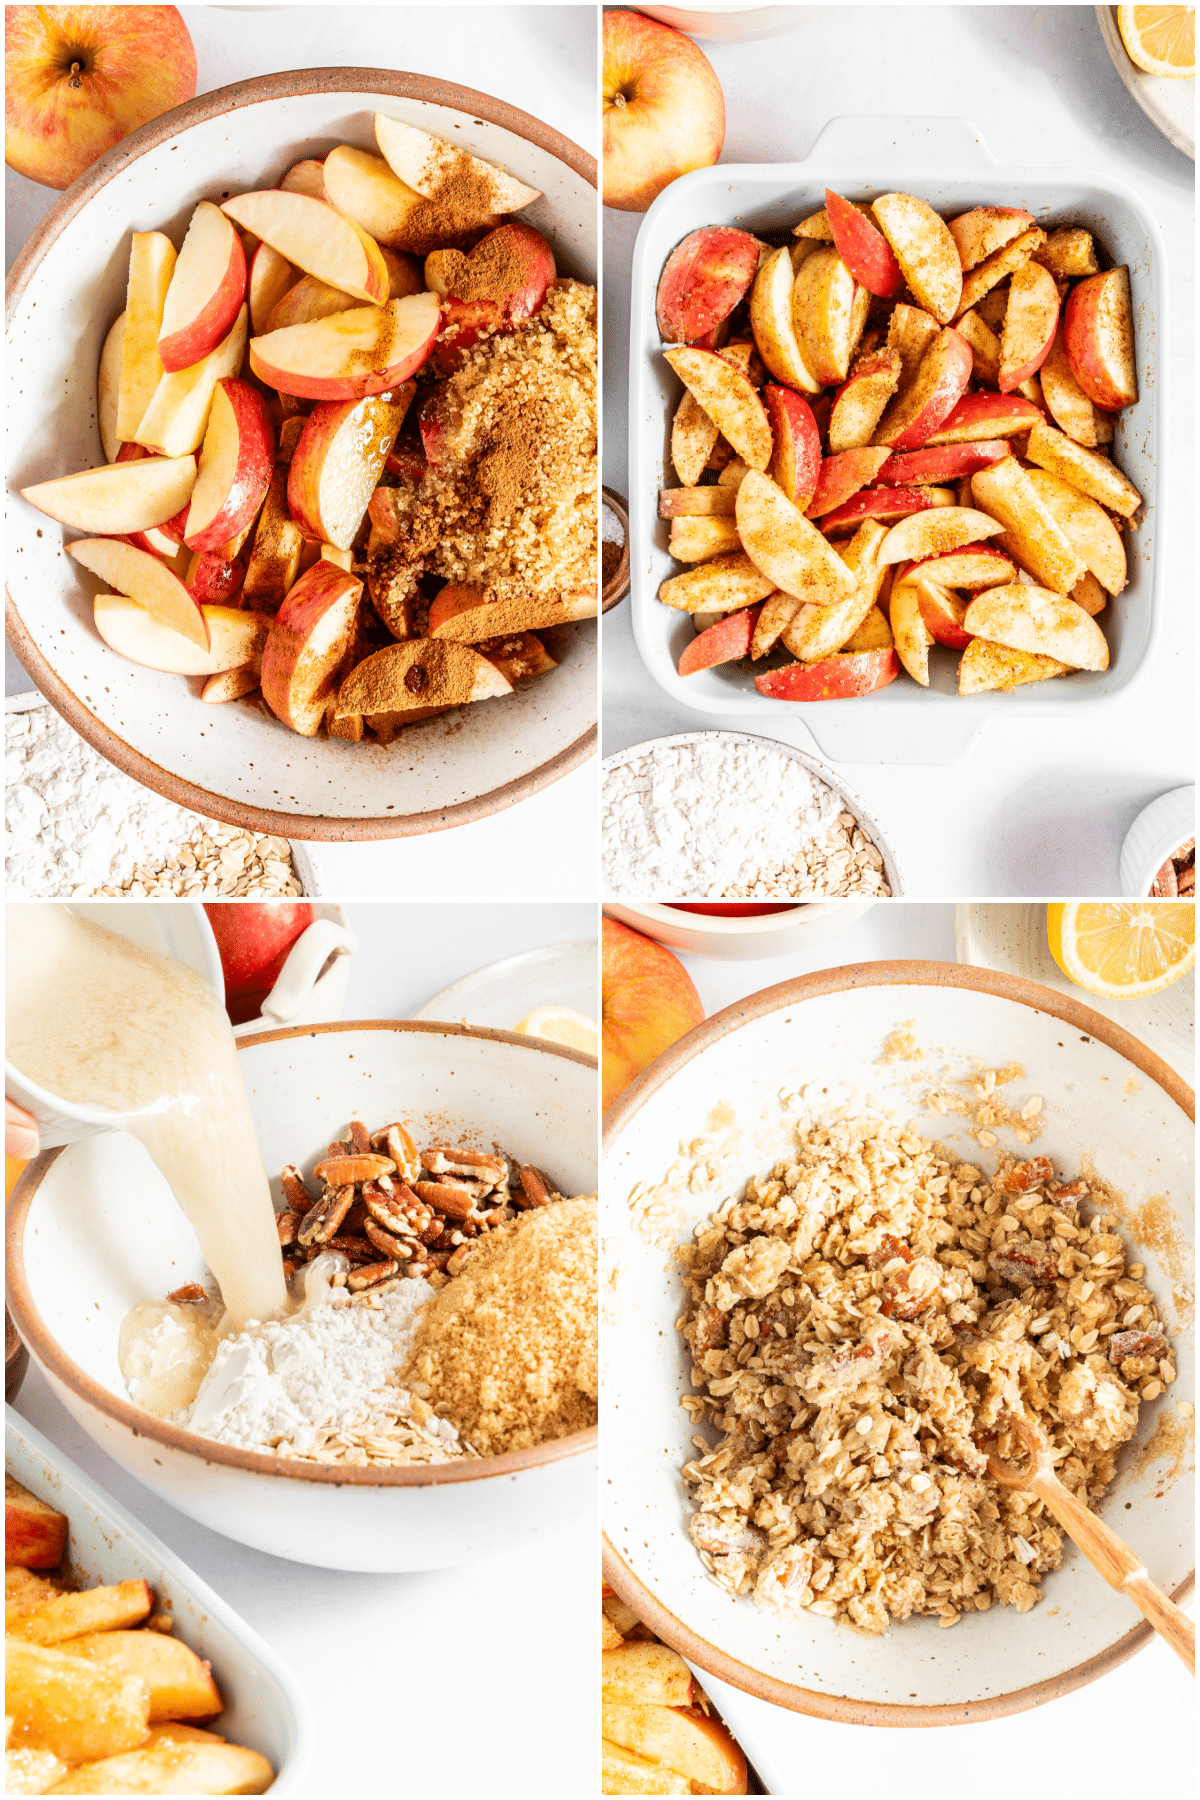 A four photo collage showing how to make a gluten free apple crisp: add sliced apples to a bowl with sugar and stir to coat, add apples to a square baking dish, combine all ingredients for a crisp topping and stir until crumbly.